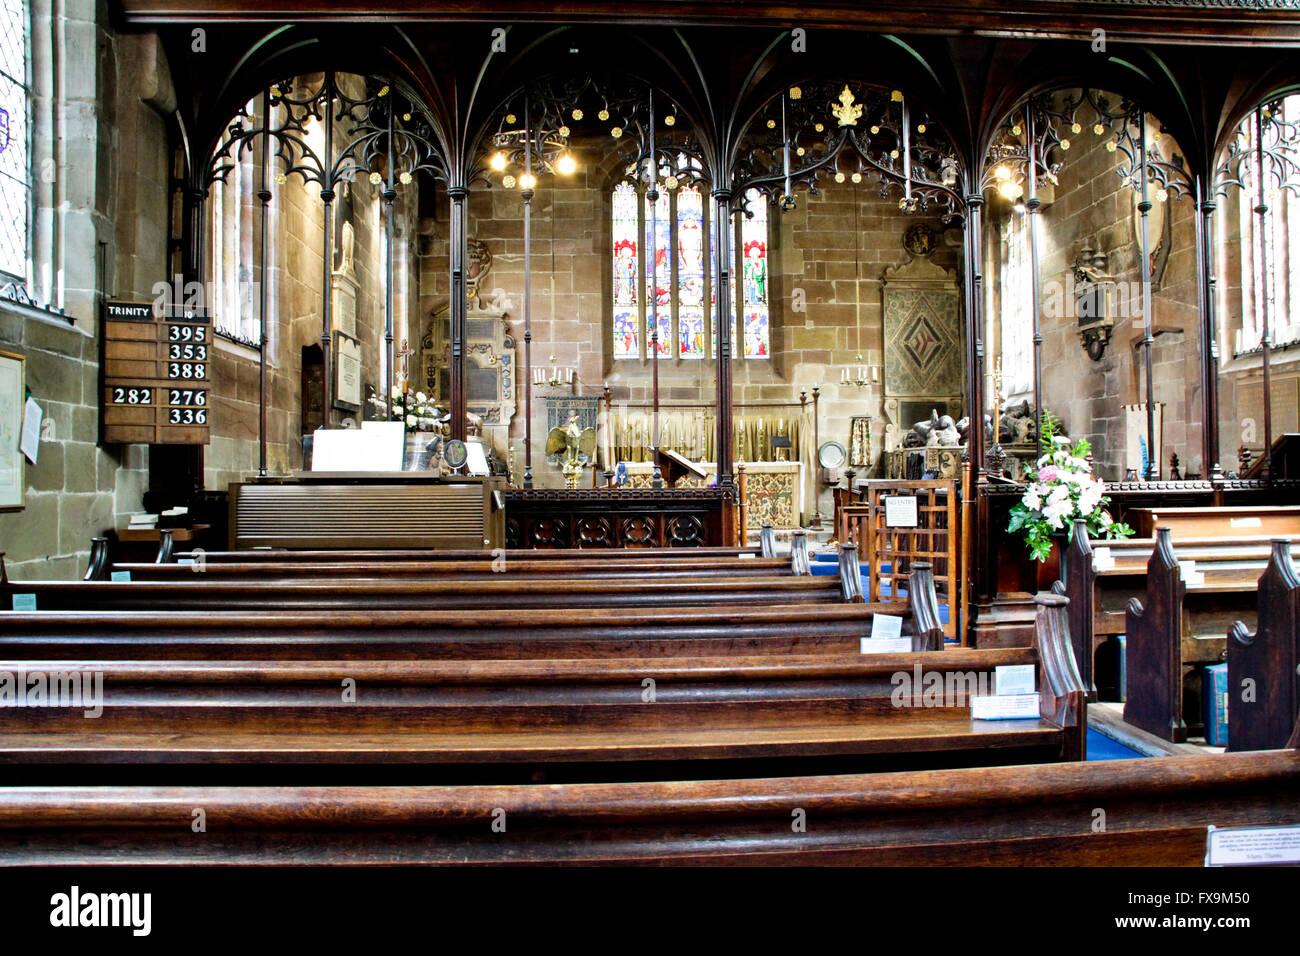 Interior church of St James the Great Gawsworth Stock Photo